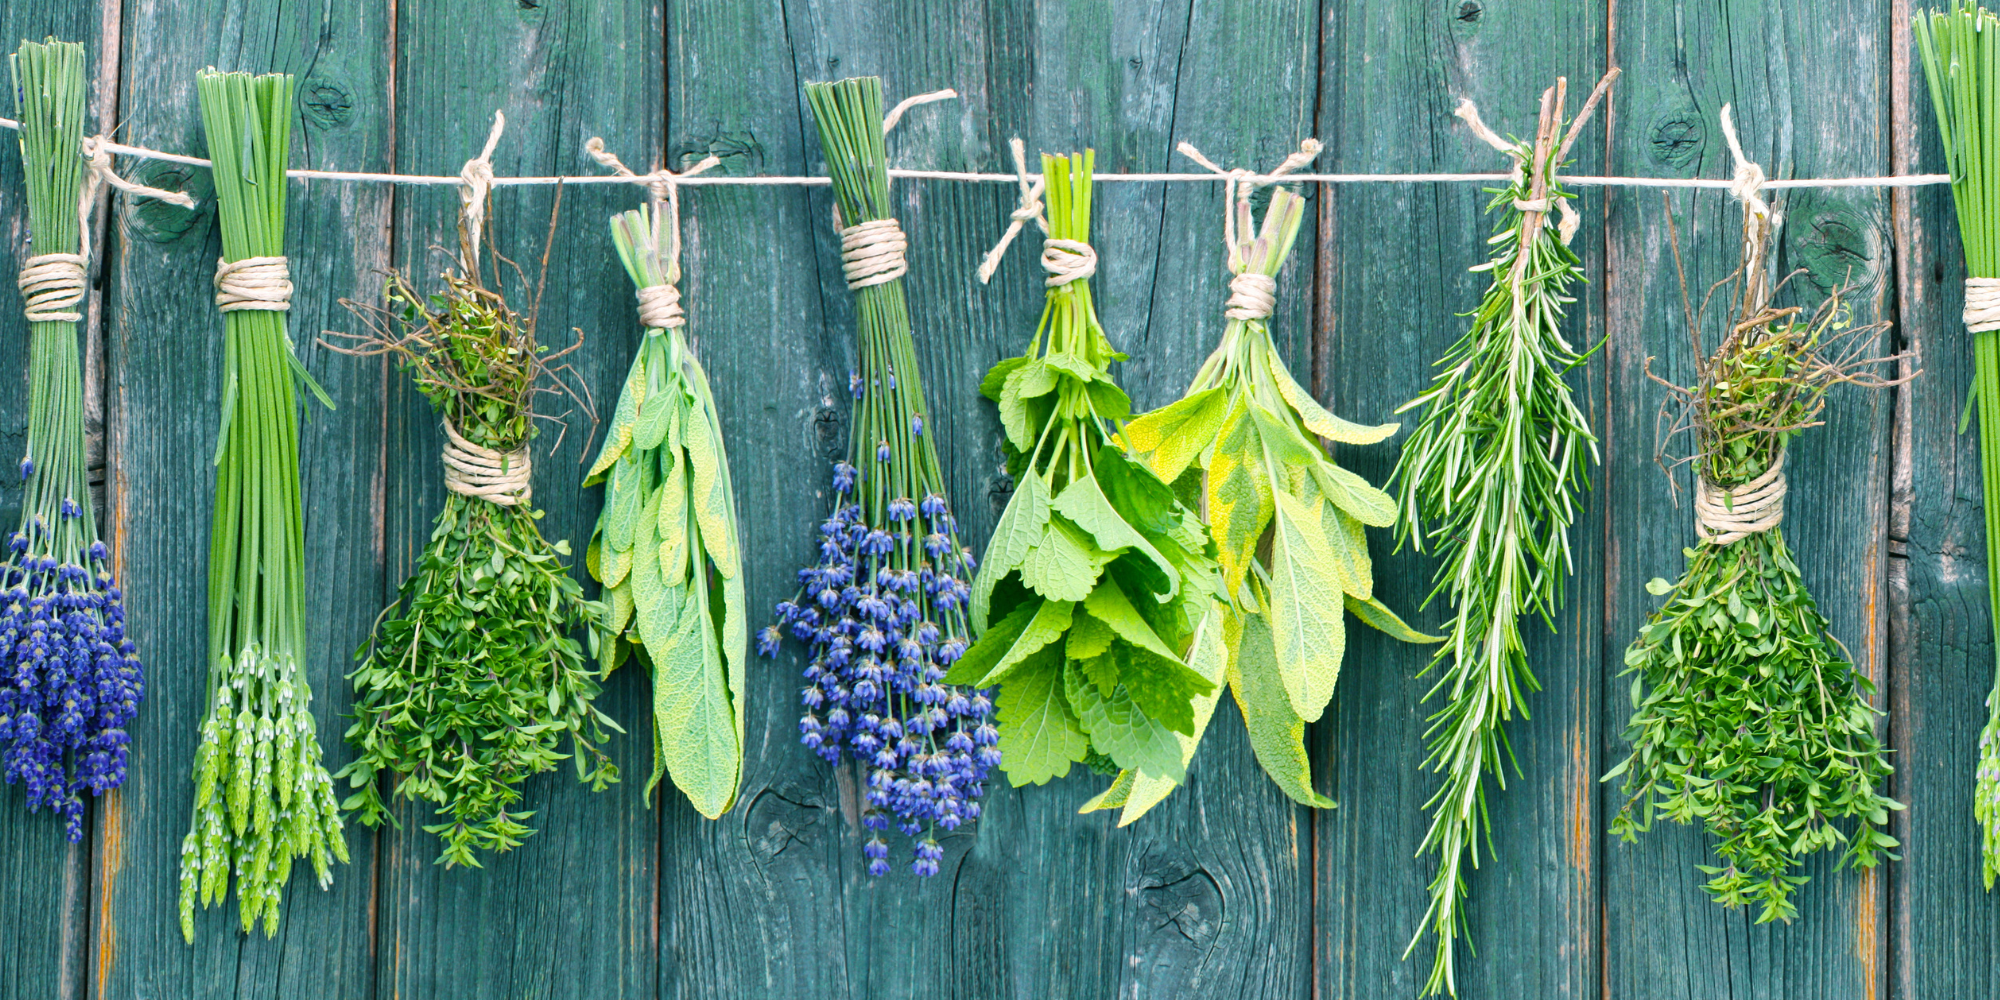 A few small bunches of fresh cut herbs hanging upside-down from twine against a grey/green wooden wall.